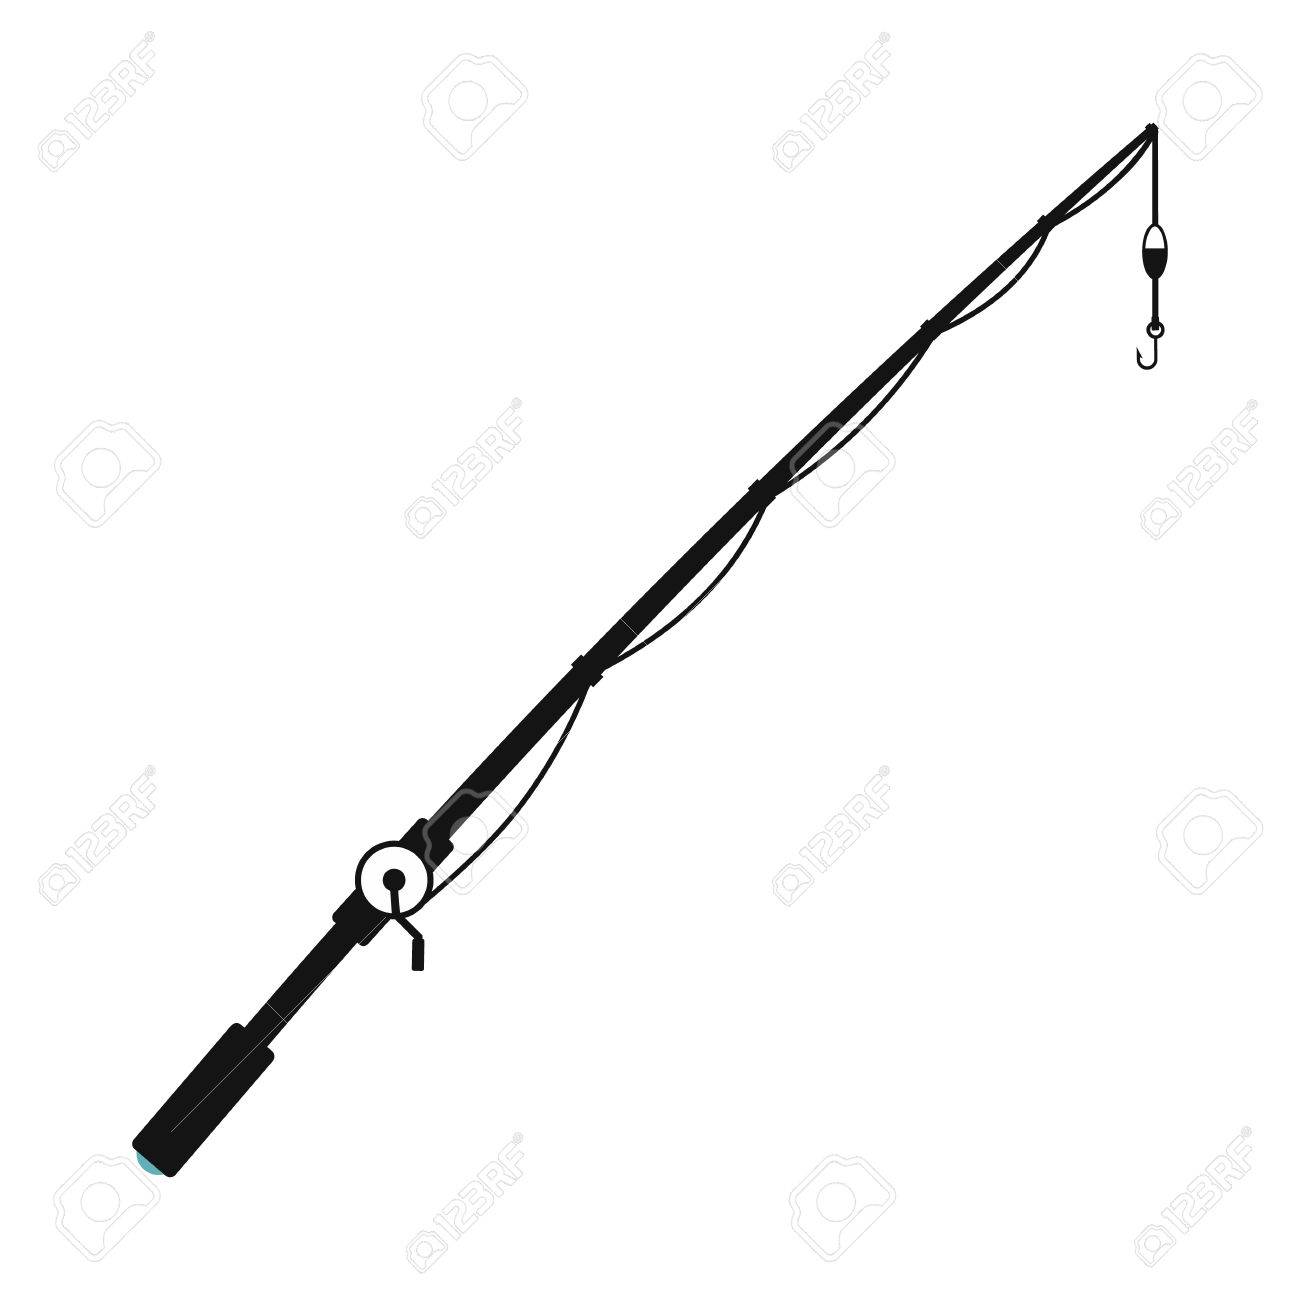 fishing rod clipart black and white 10 free Cliparts | Download images ...